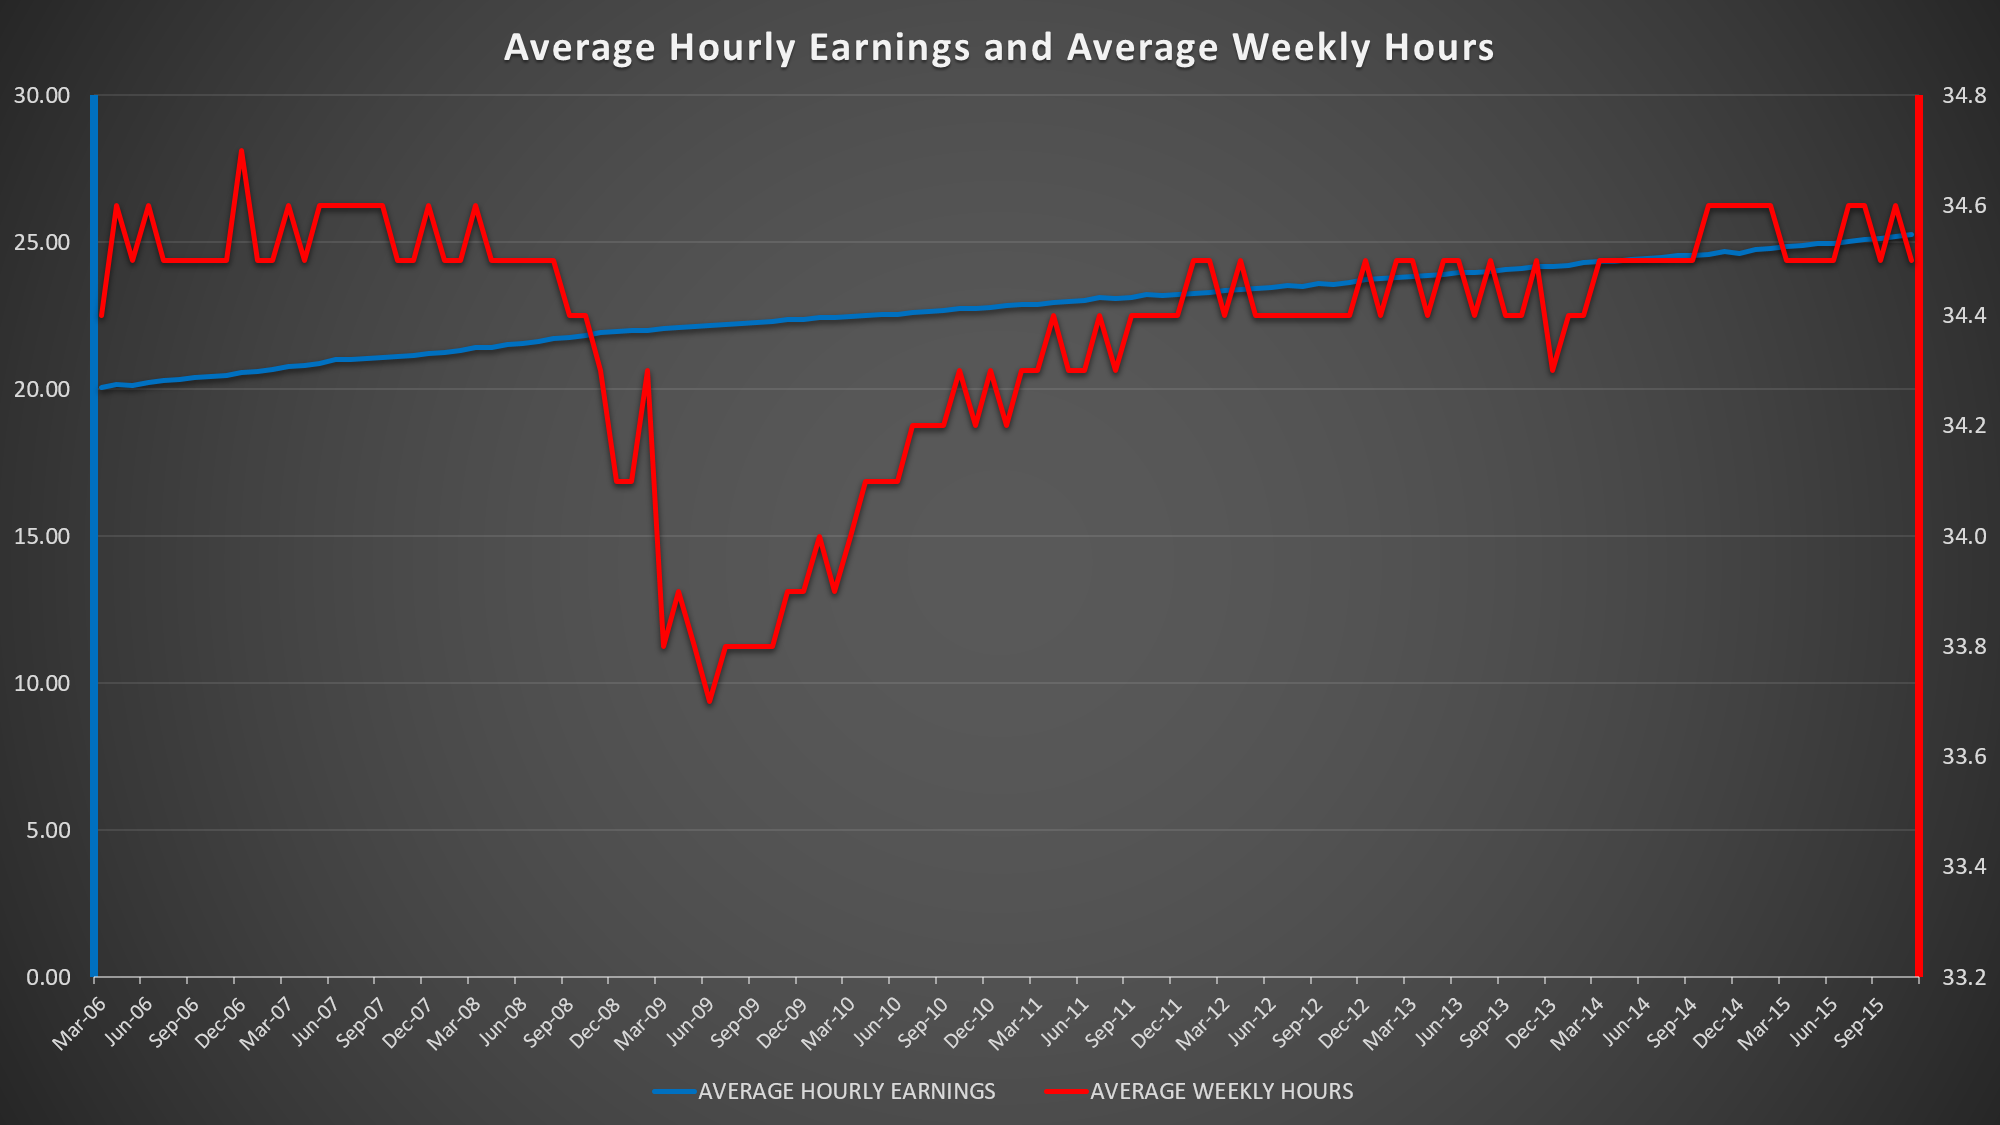 Average Hourly Earnings and Average Weekly Hours